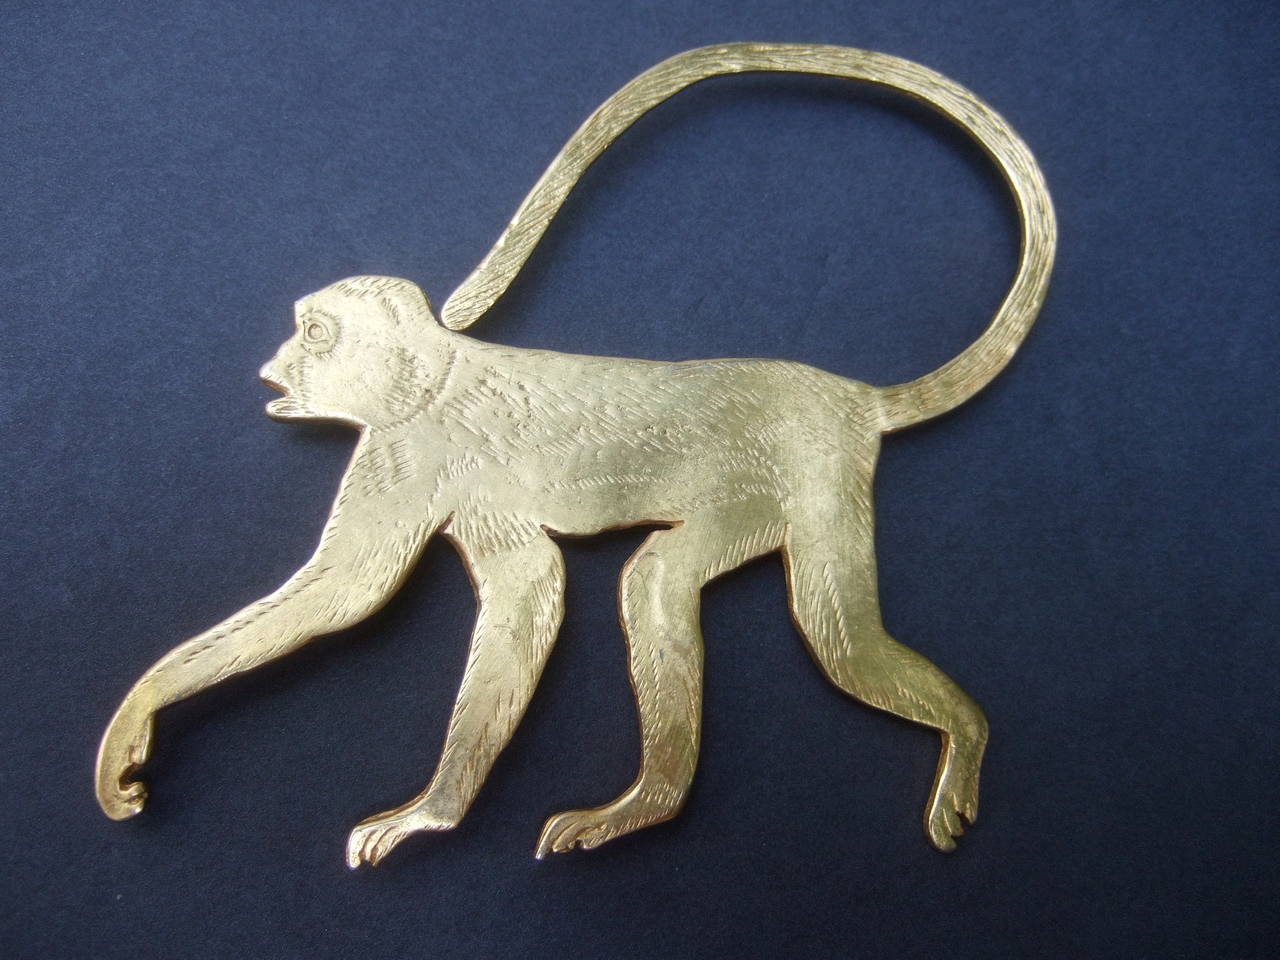 Avant-garde huge gilt metal monkey brooch c 1990
The unique matte gilt metal monkey brooch is 
accented with etched designs that emulates fur
The large scale figural brooch makes a very 
striking accessory 

The whimsical artisan brooch is